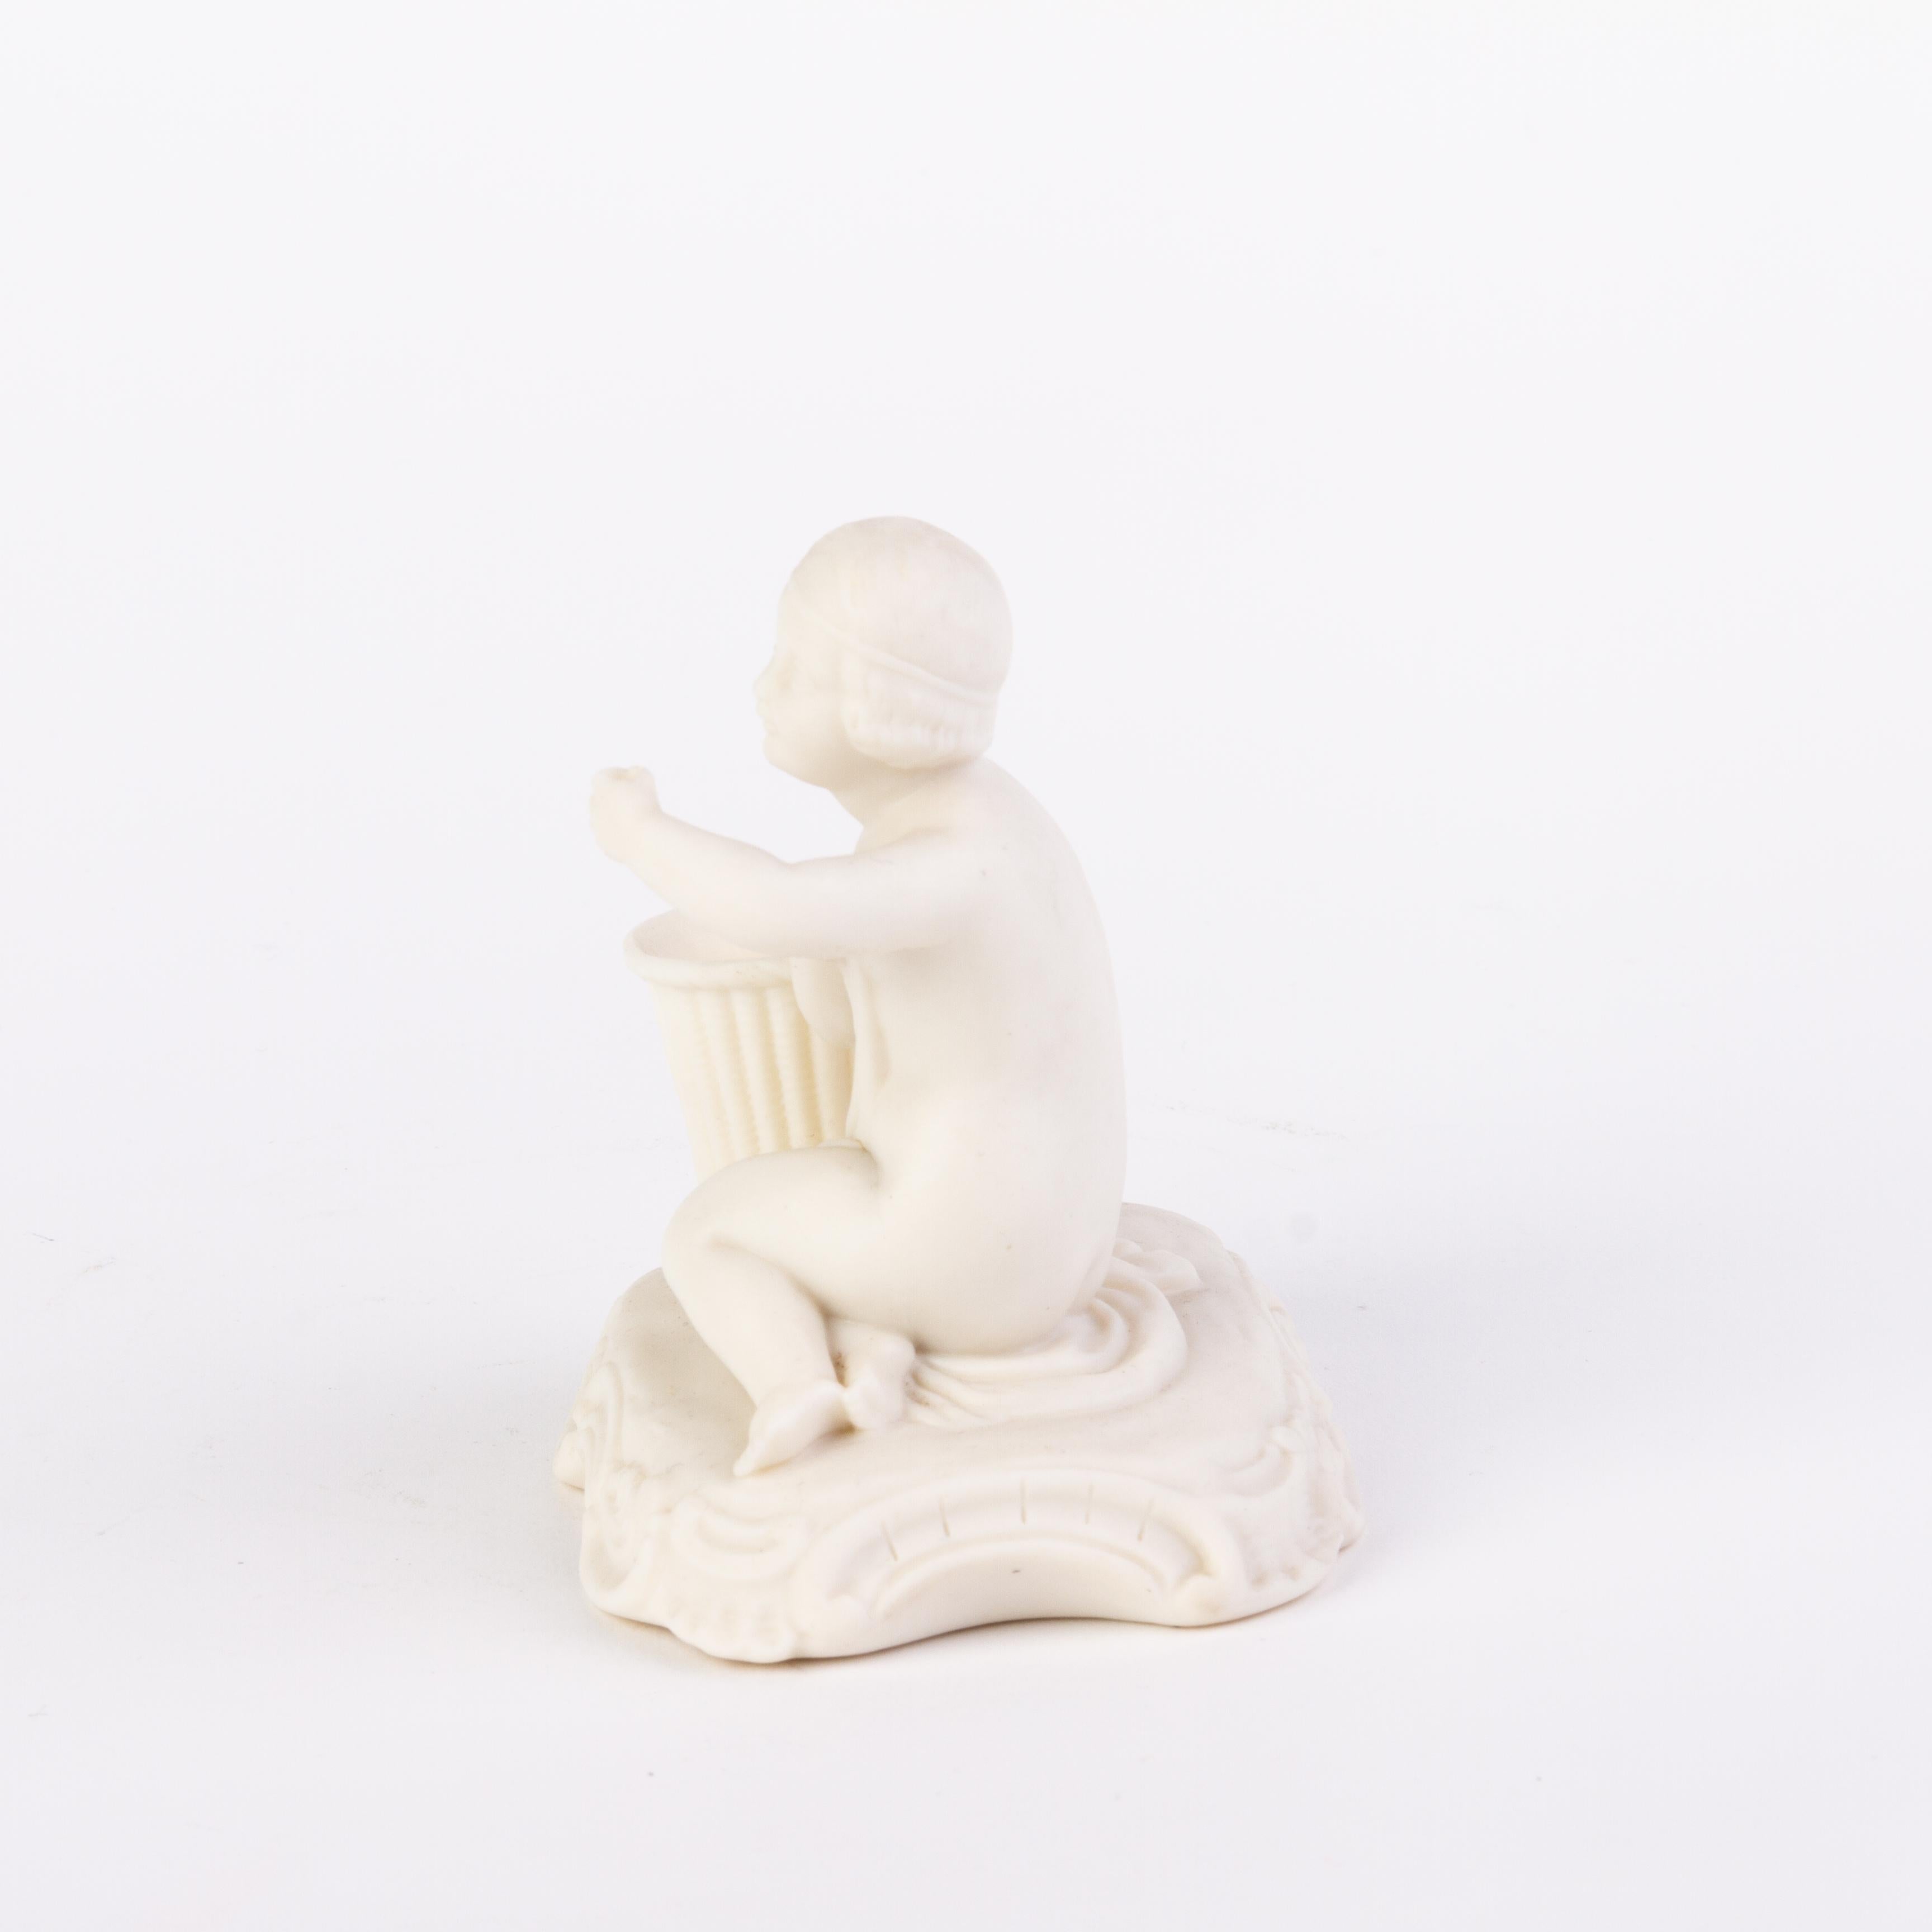 Porcelain Victorian English Copeland Parian Ware Statue Table Match Holder 19th Century For Sale